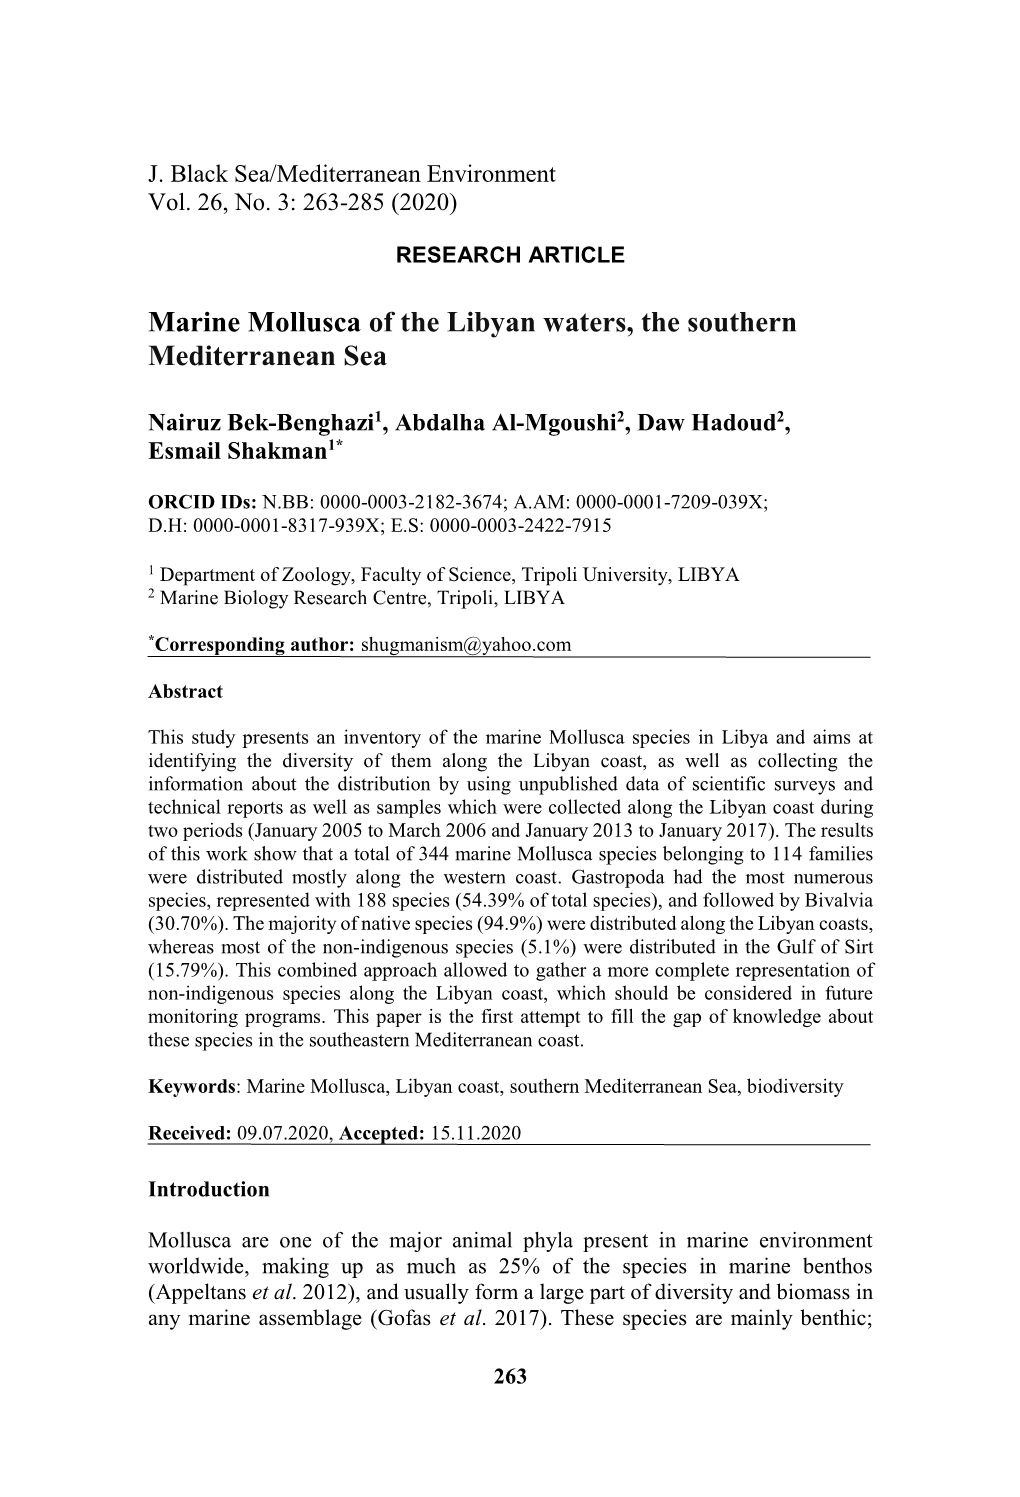 Marine Mollusca of the Libyan Waters, the Southern Mediterranean Sea